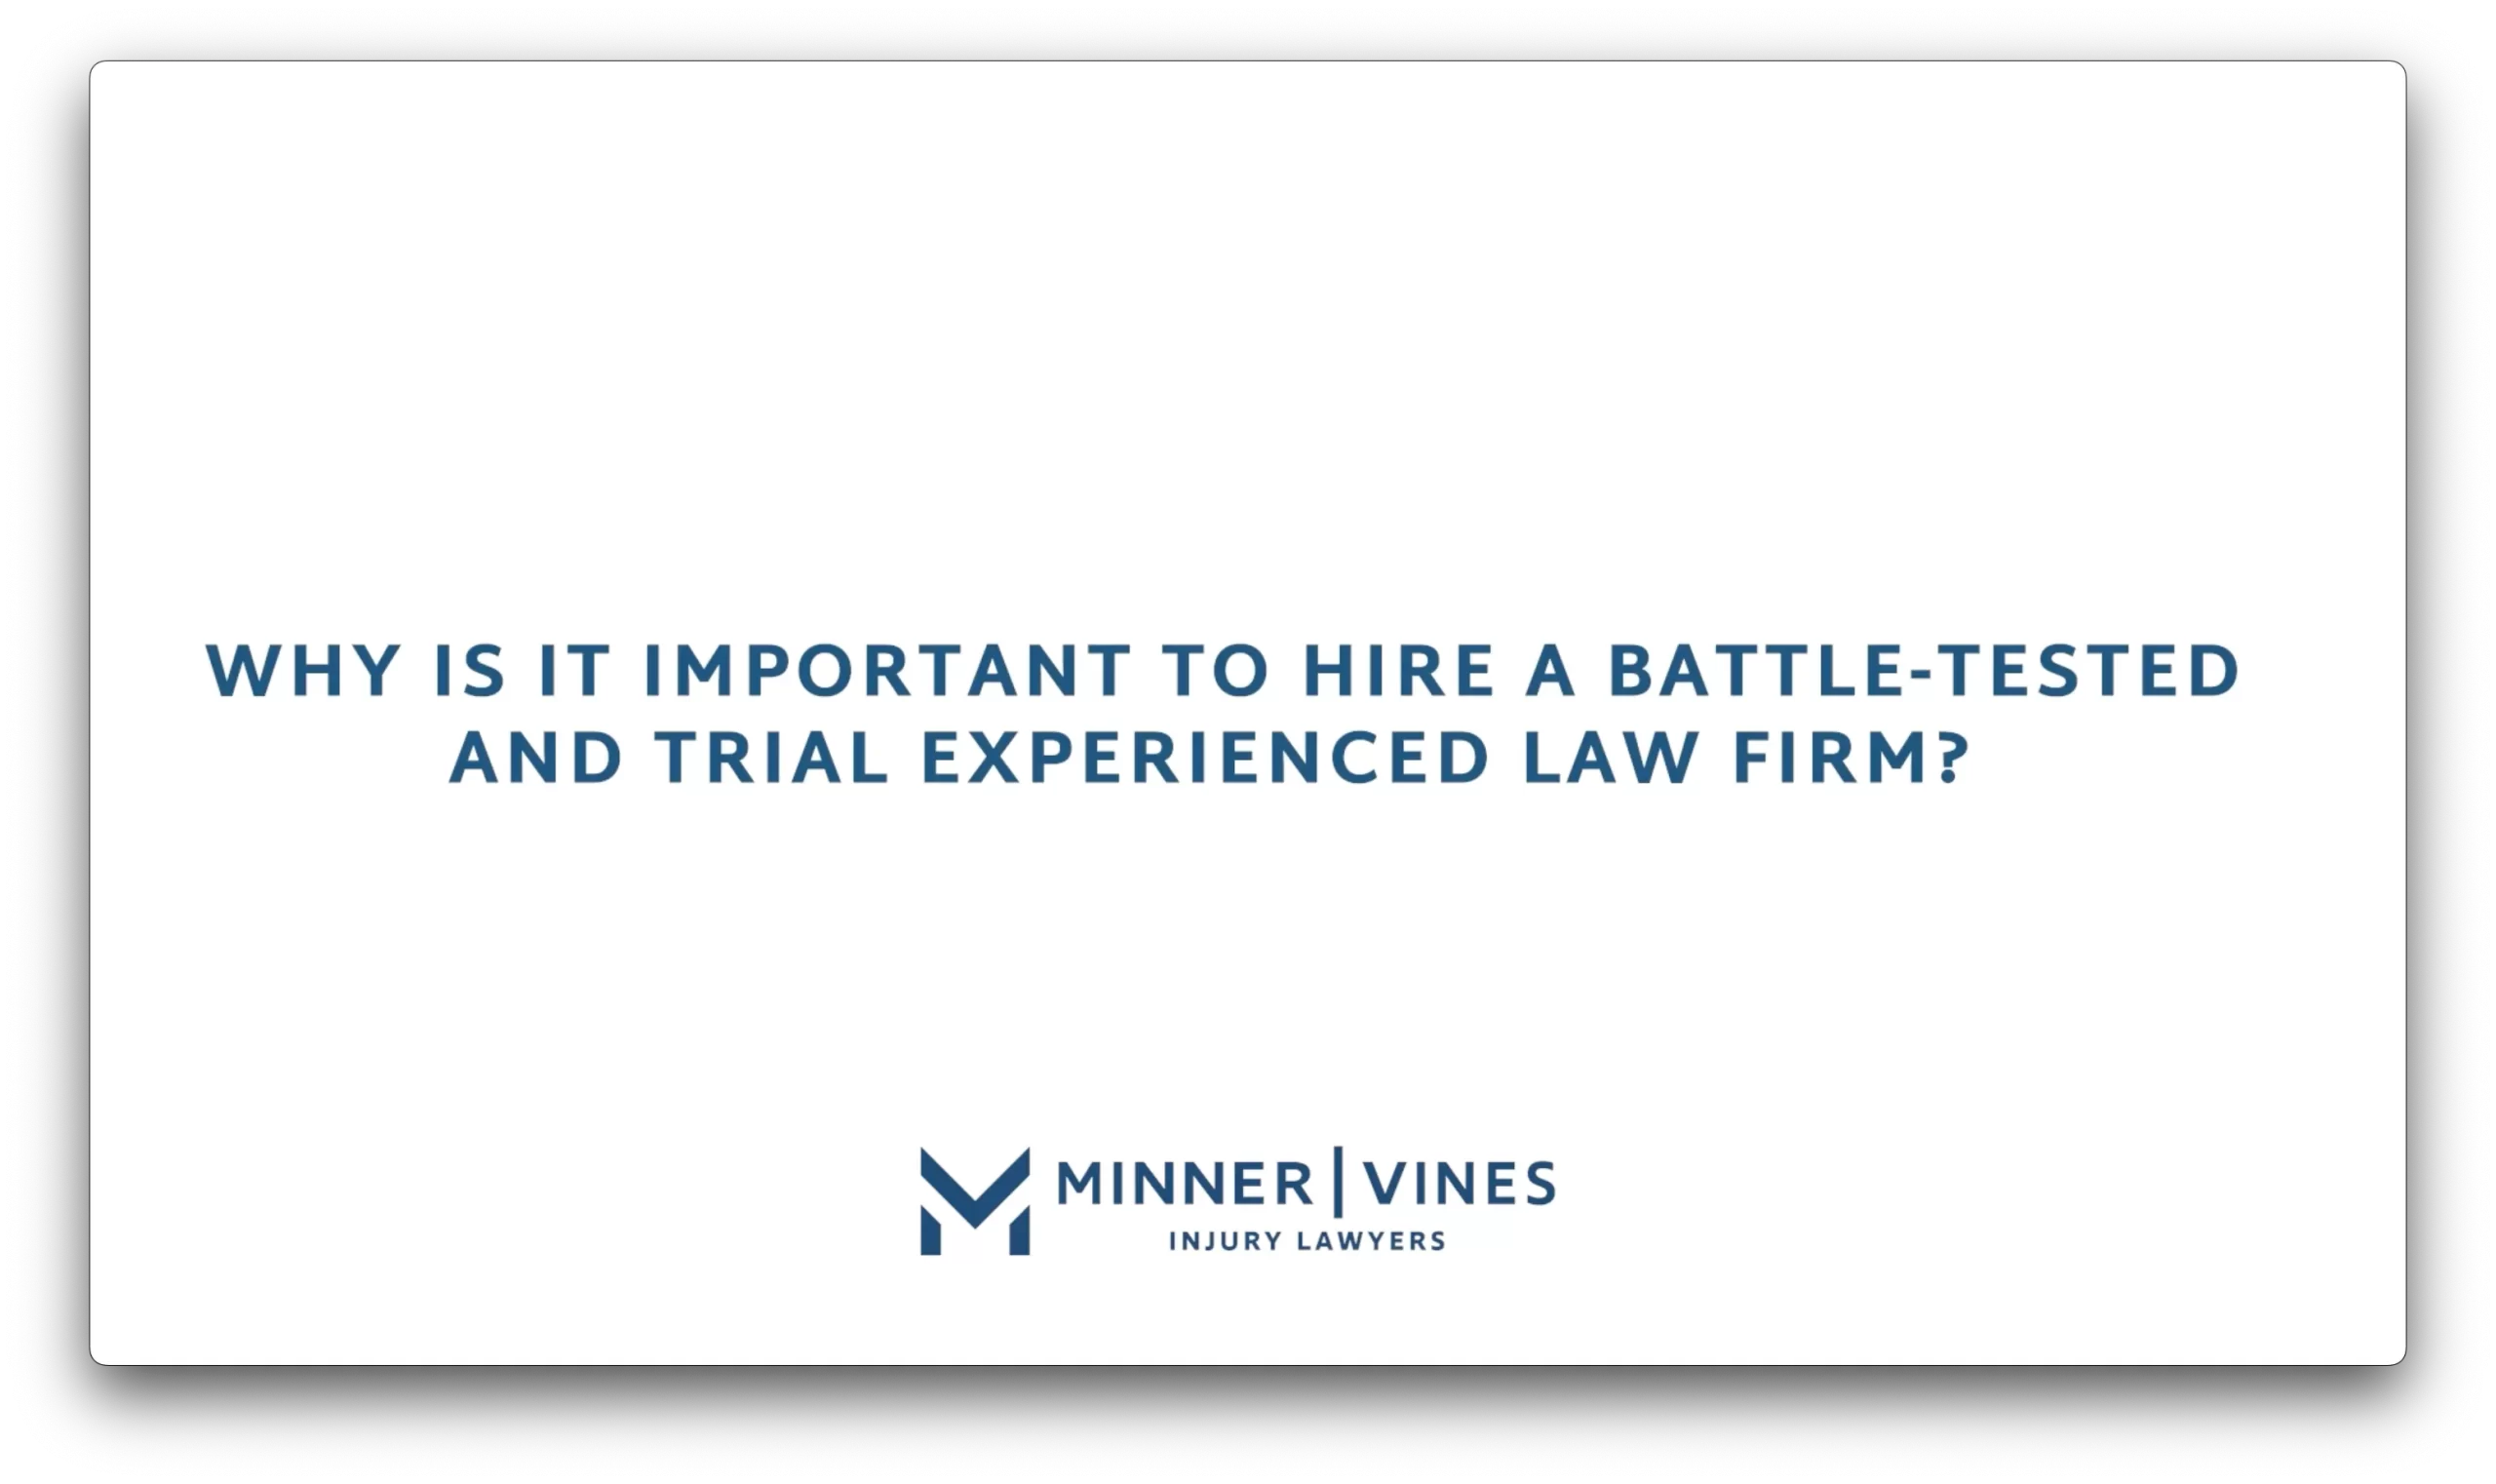 Why is it important to hire a battle-tested and trial experienced law firm?